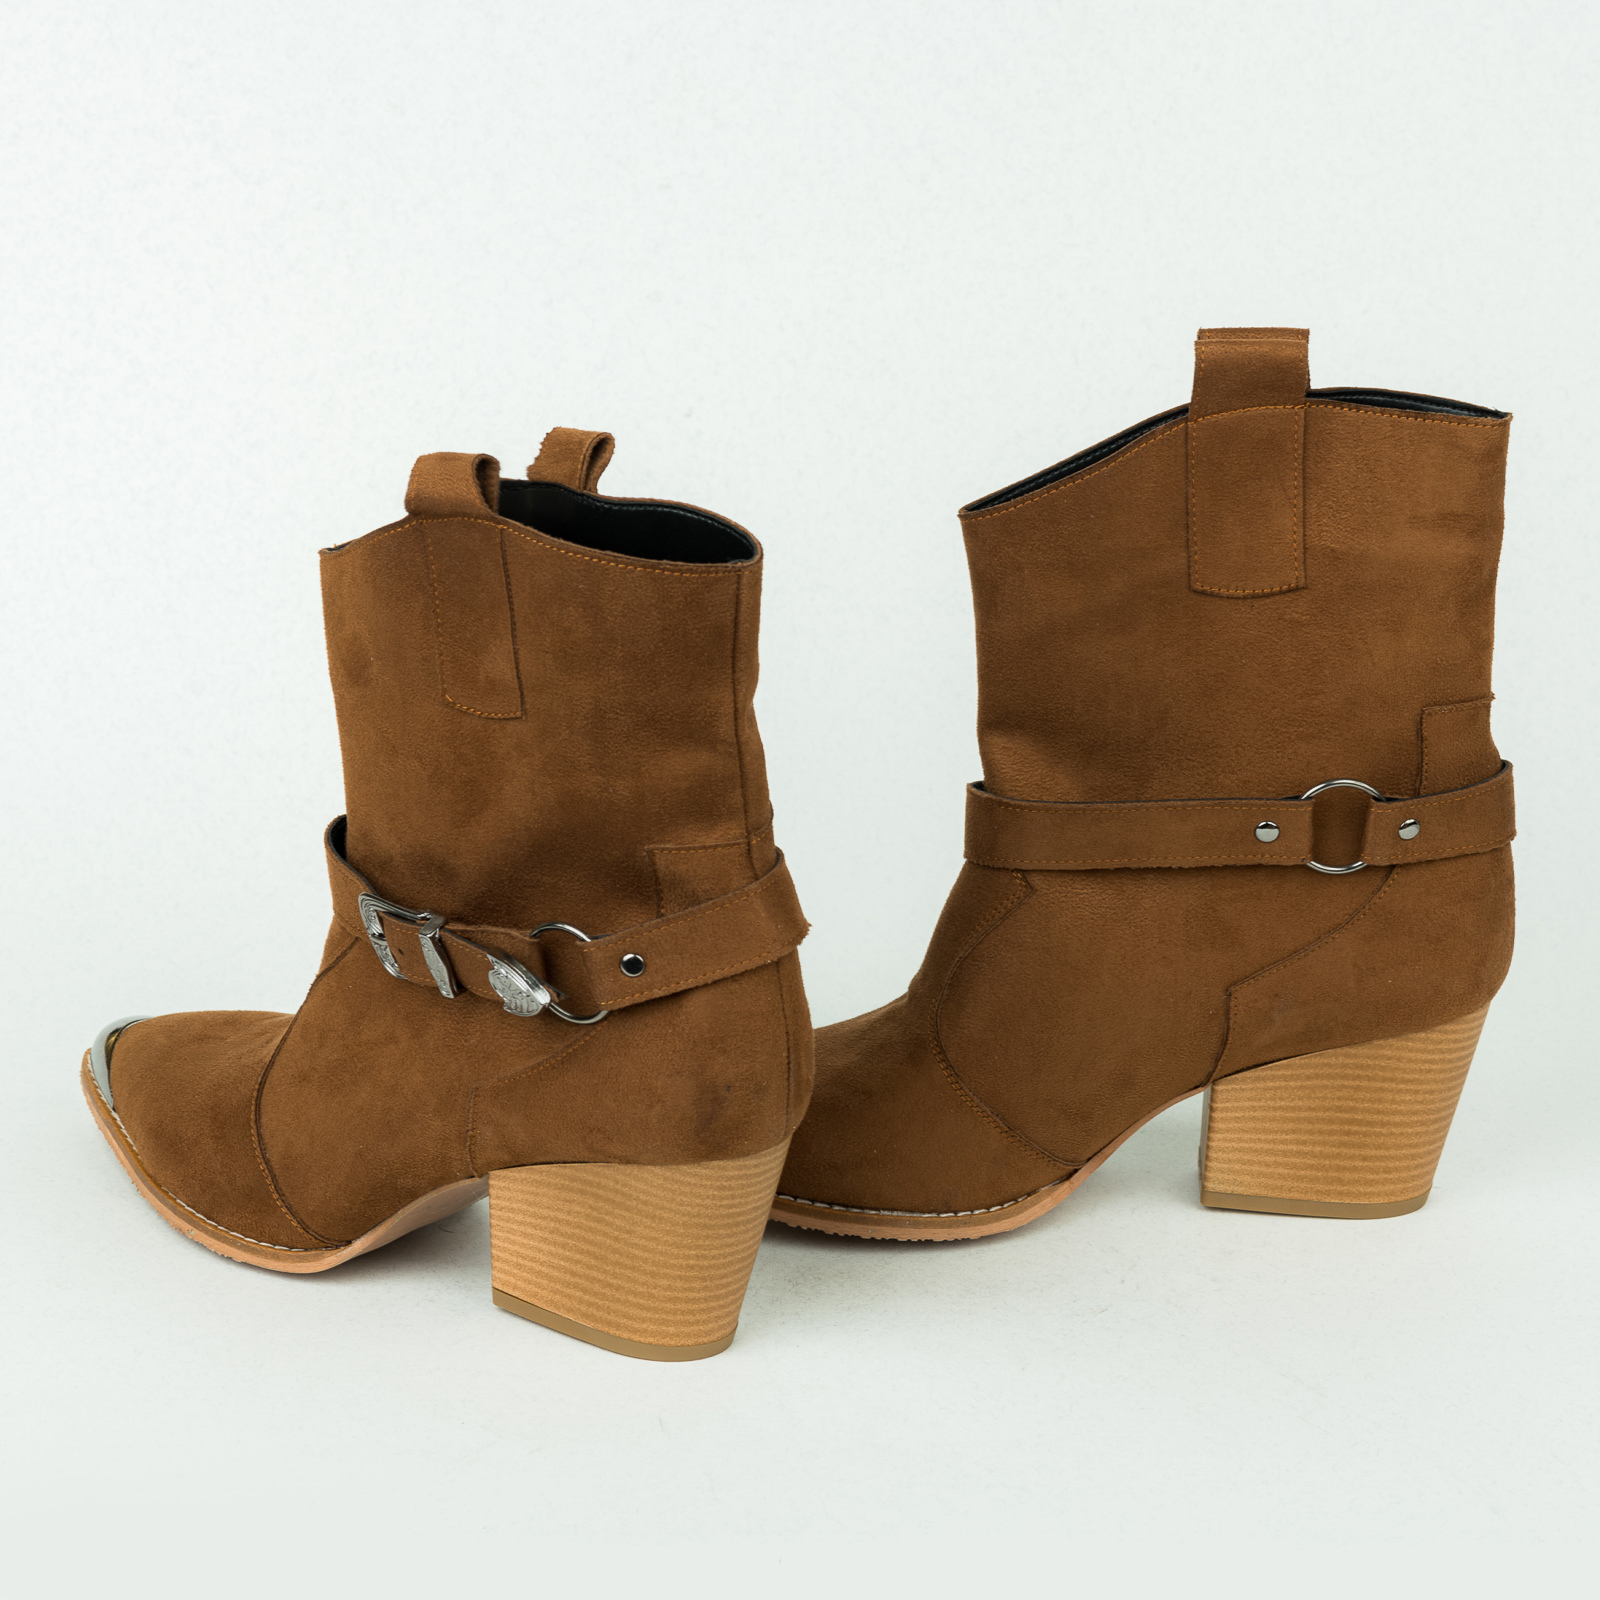 Women ankle boots B409 - CAMEL